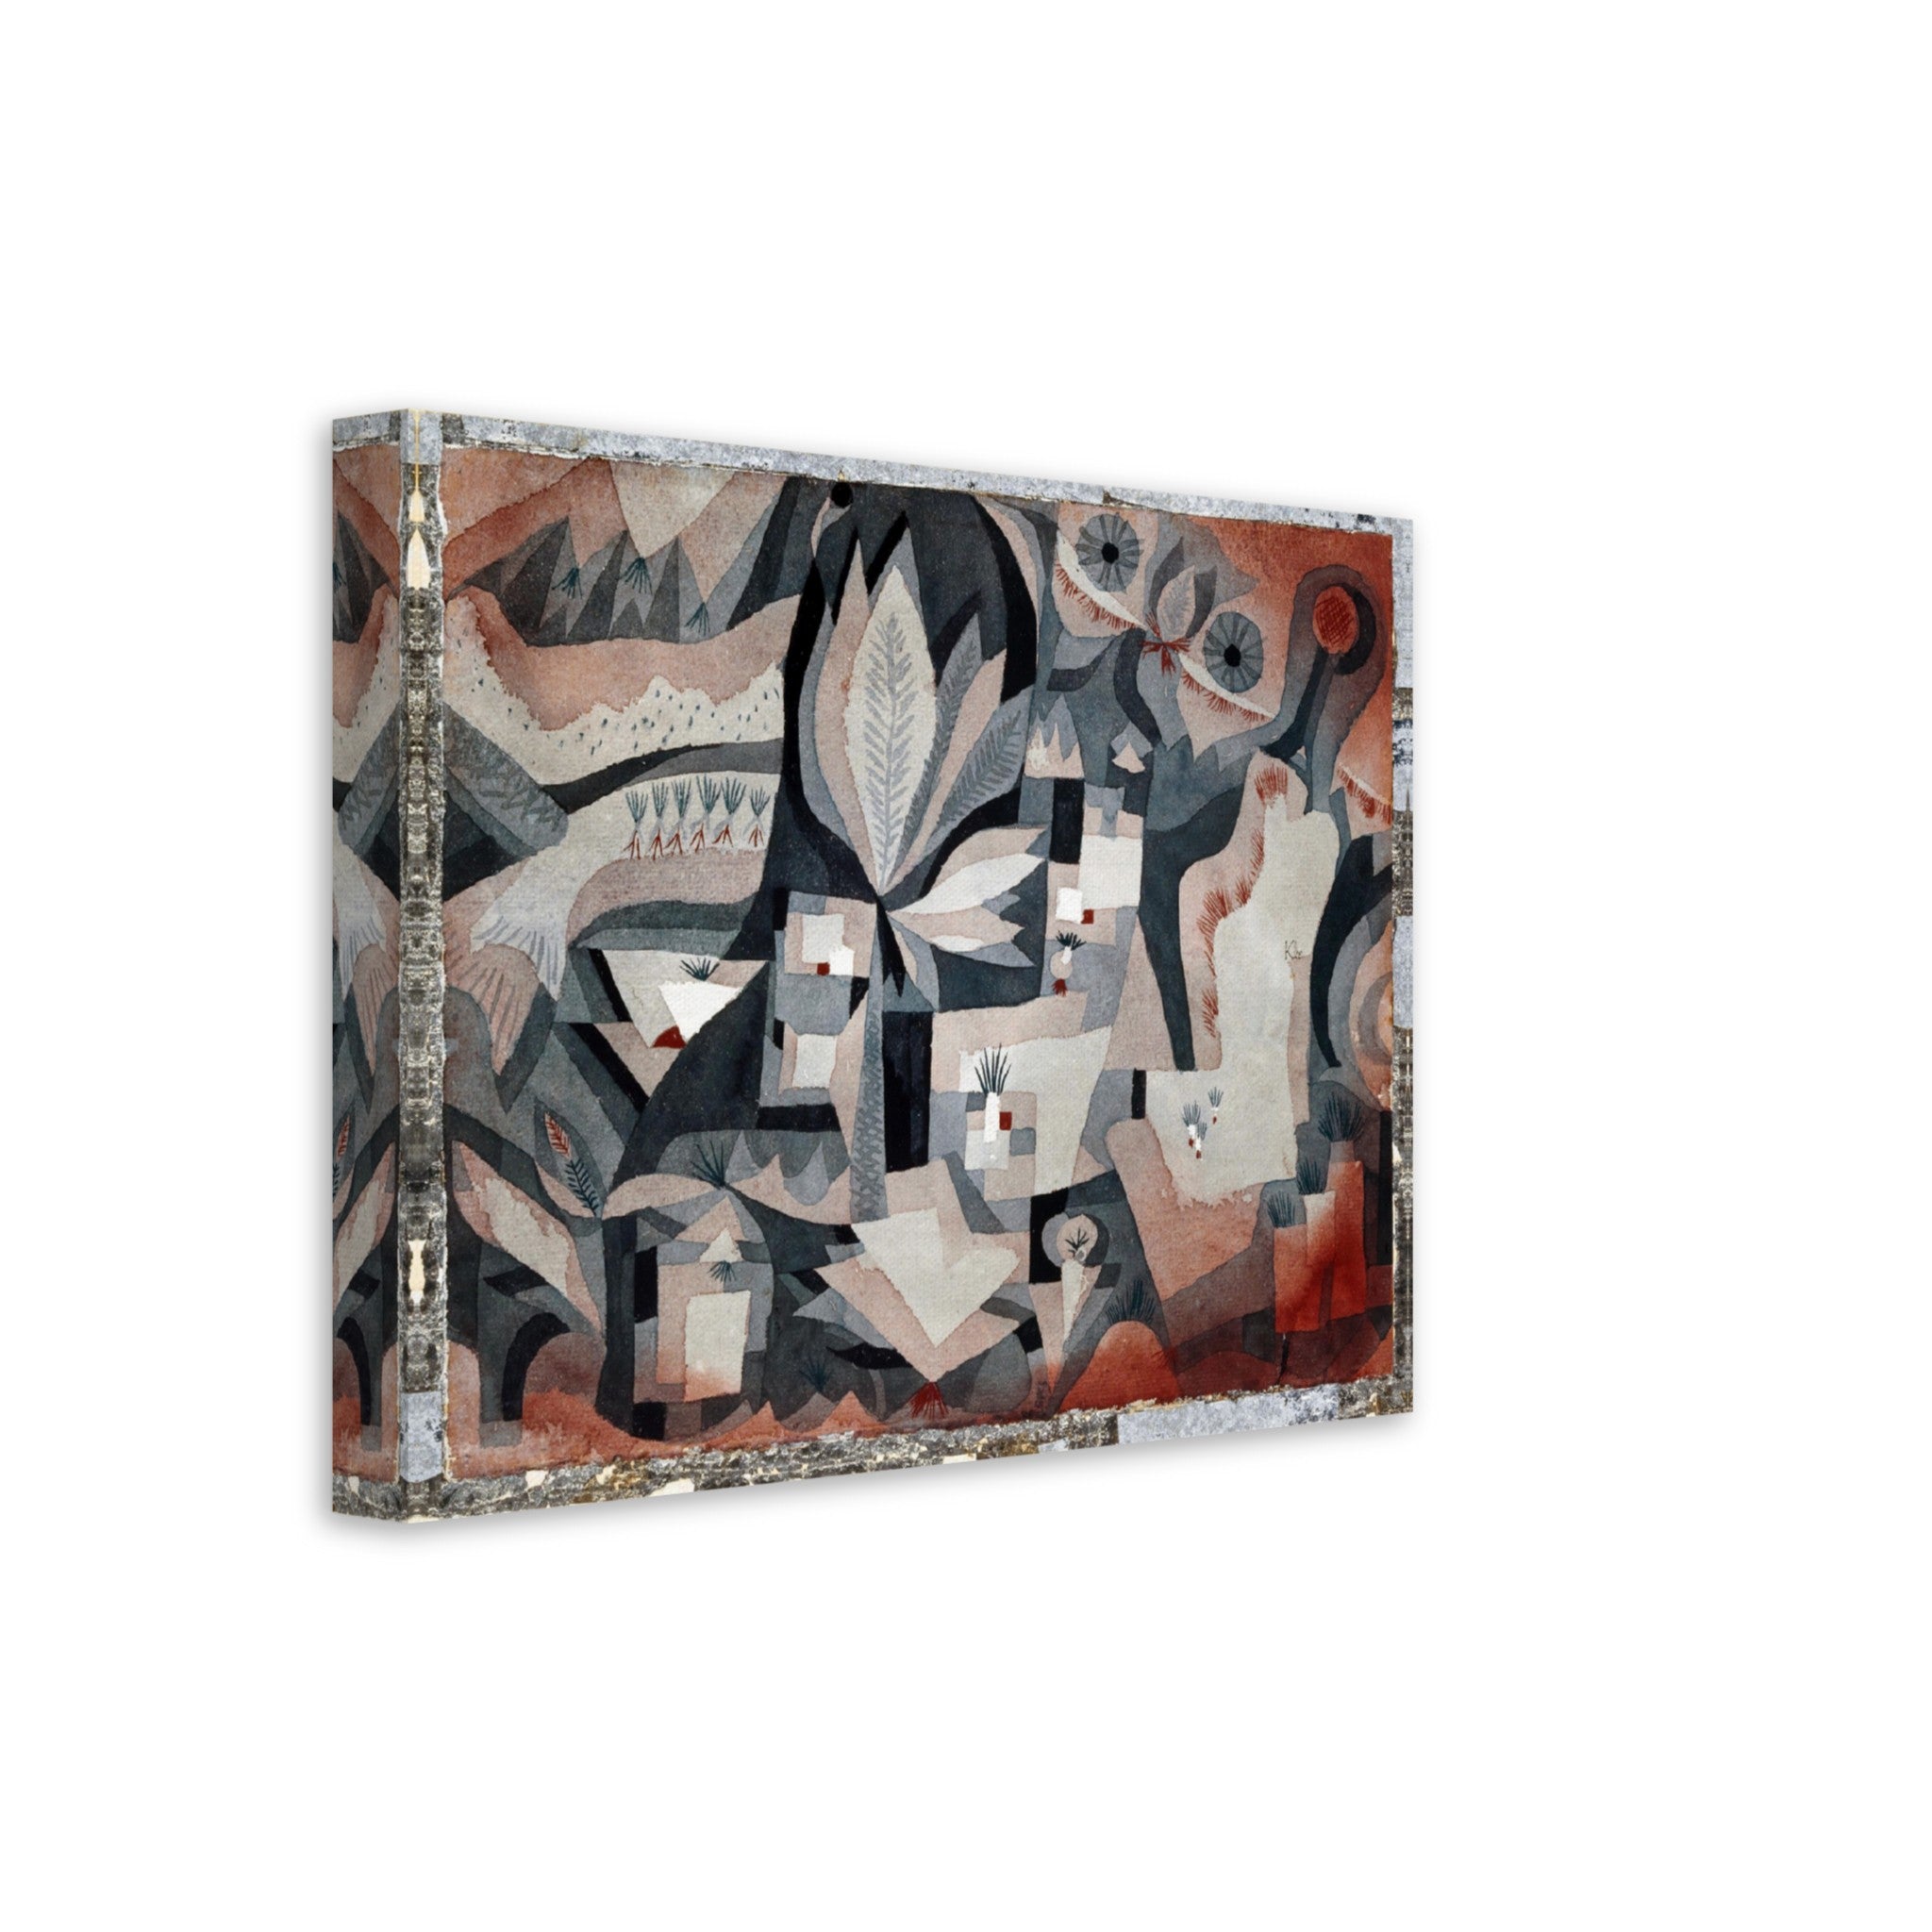 Paul Klee Dry Cooler Canvas Print, Abstract Art Canvas, Paul Klee Canvass - WallArtPrints4U